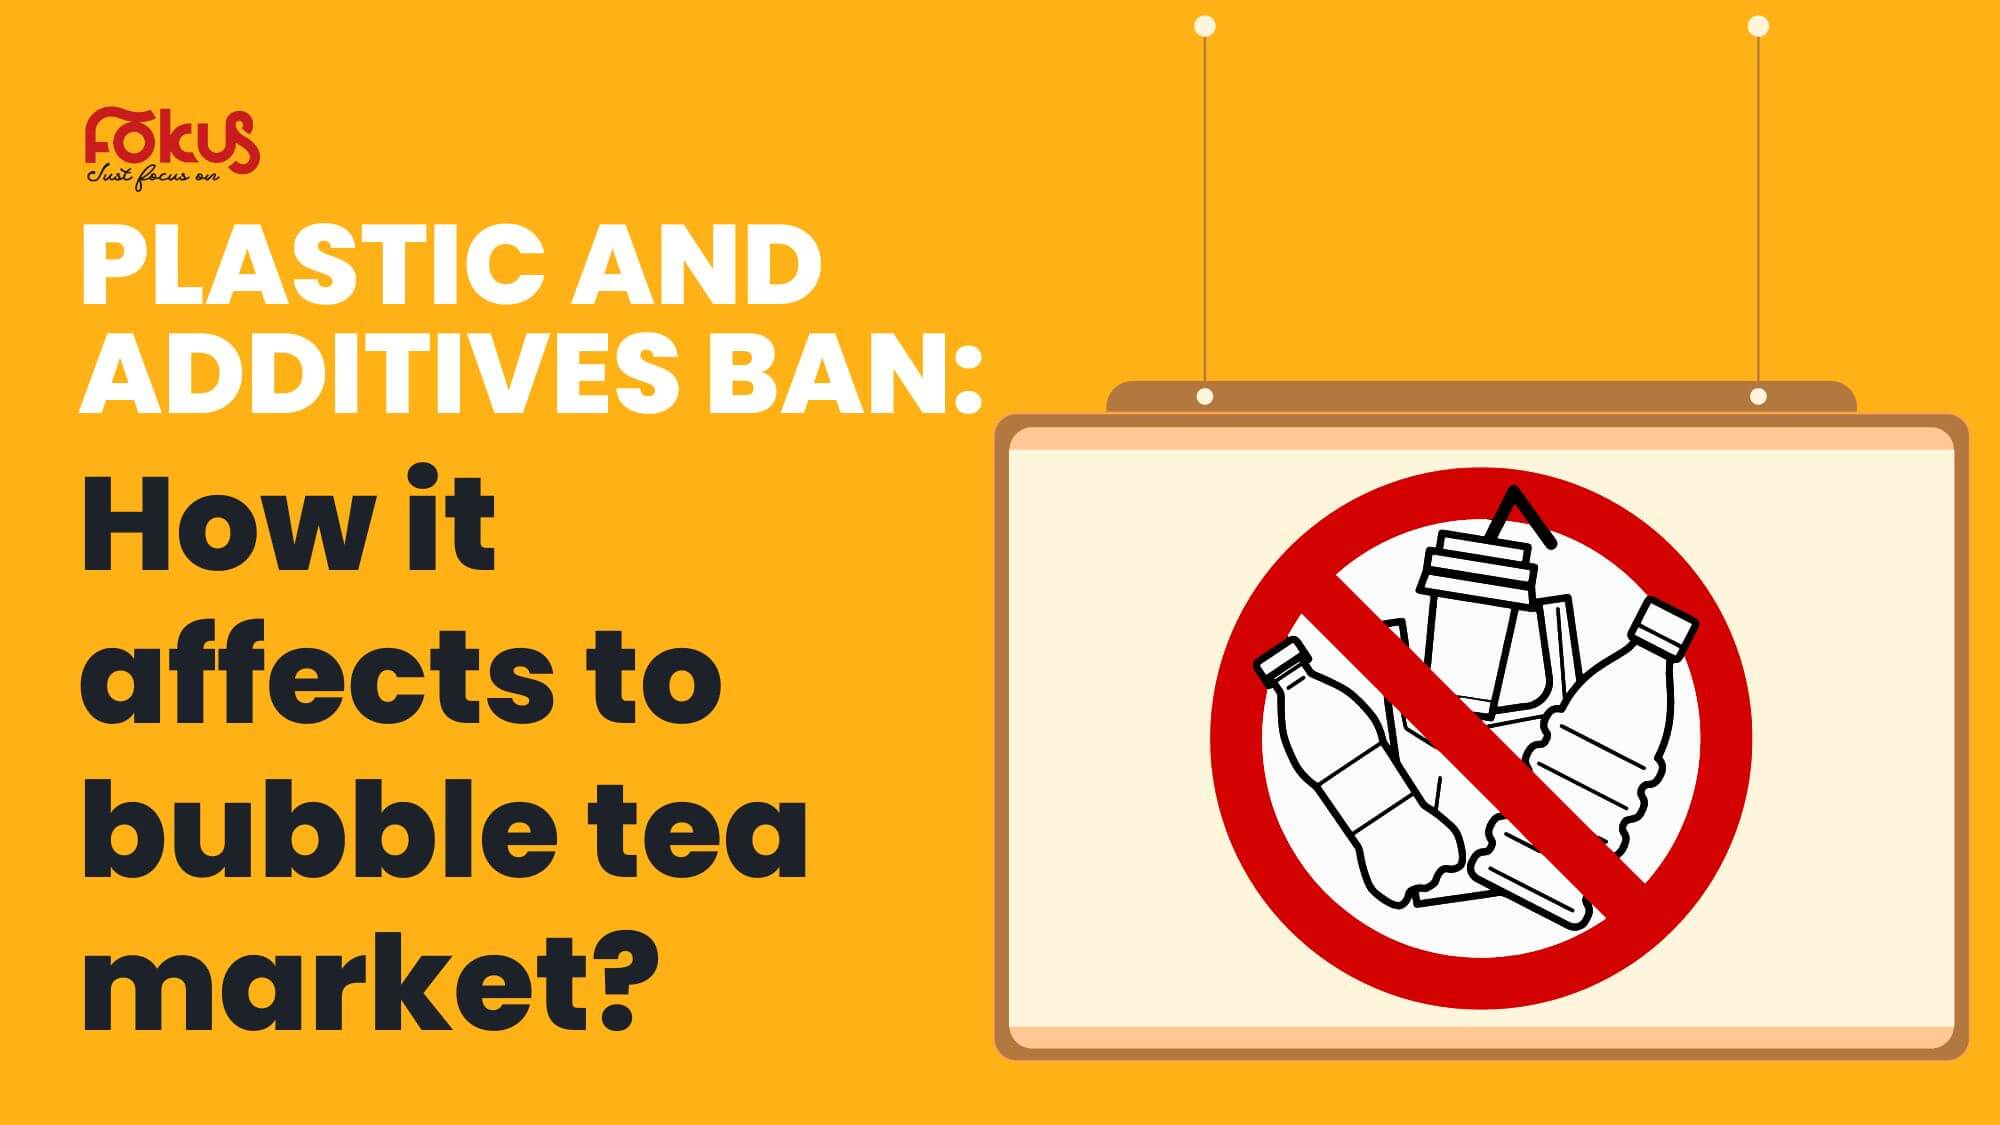 Plastic and additives ban: How it affects to bubble tea market?